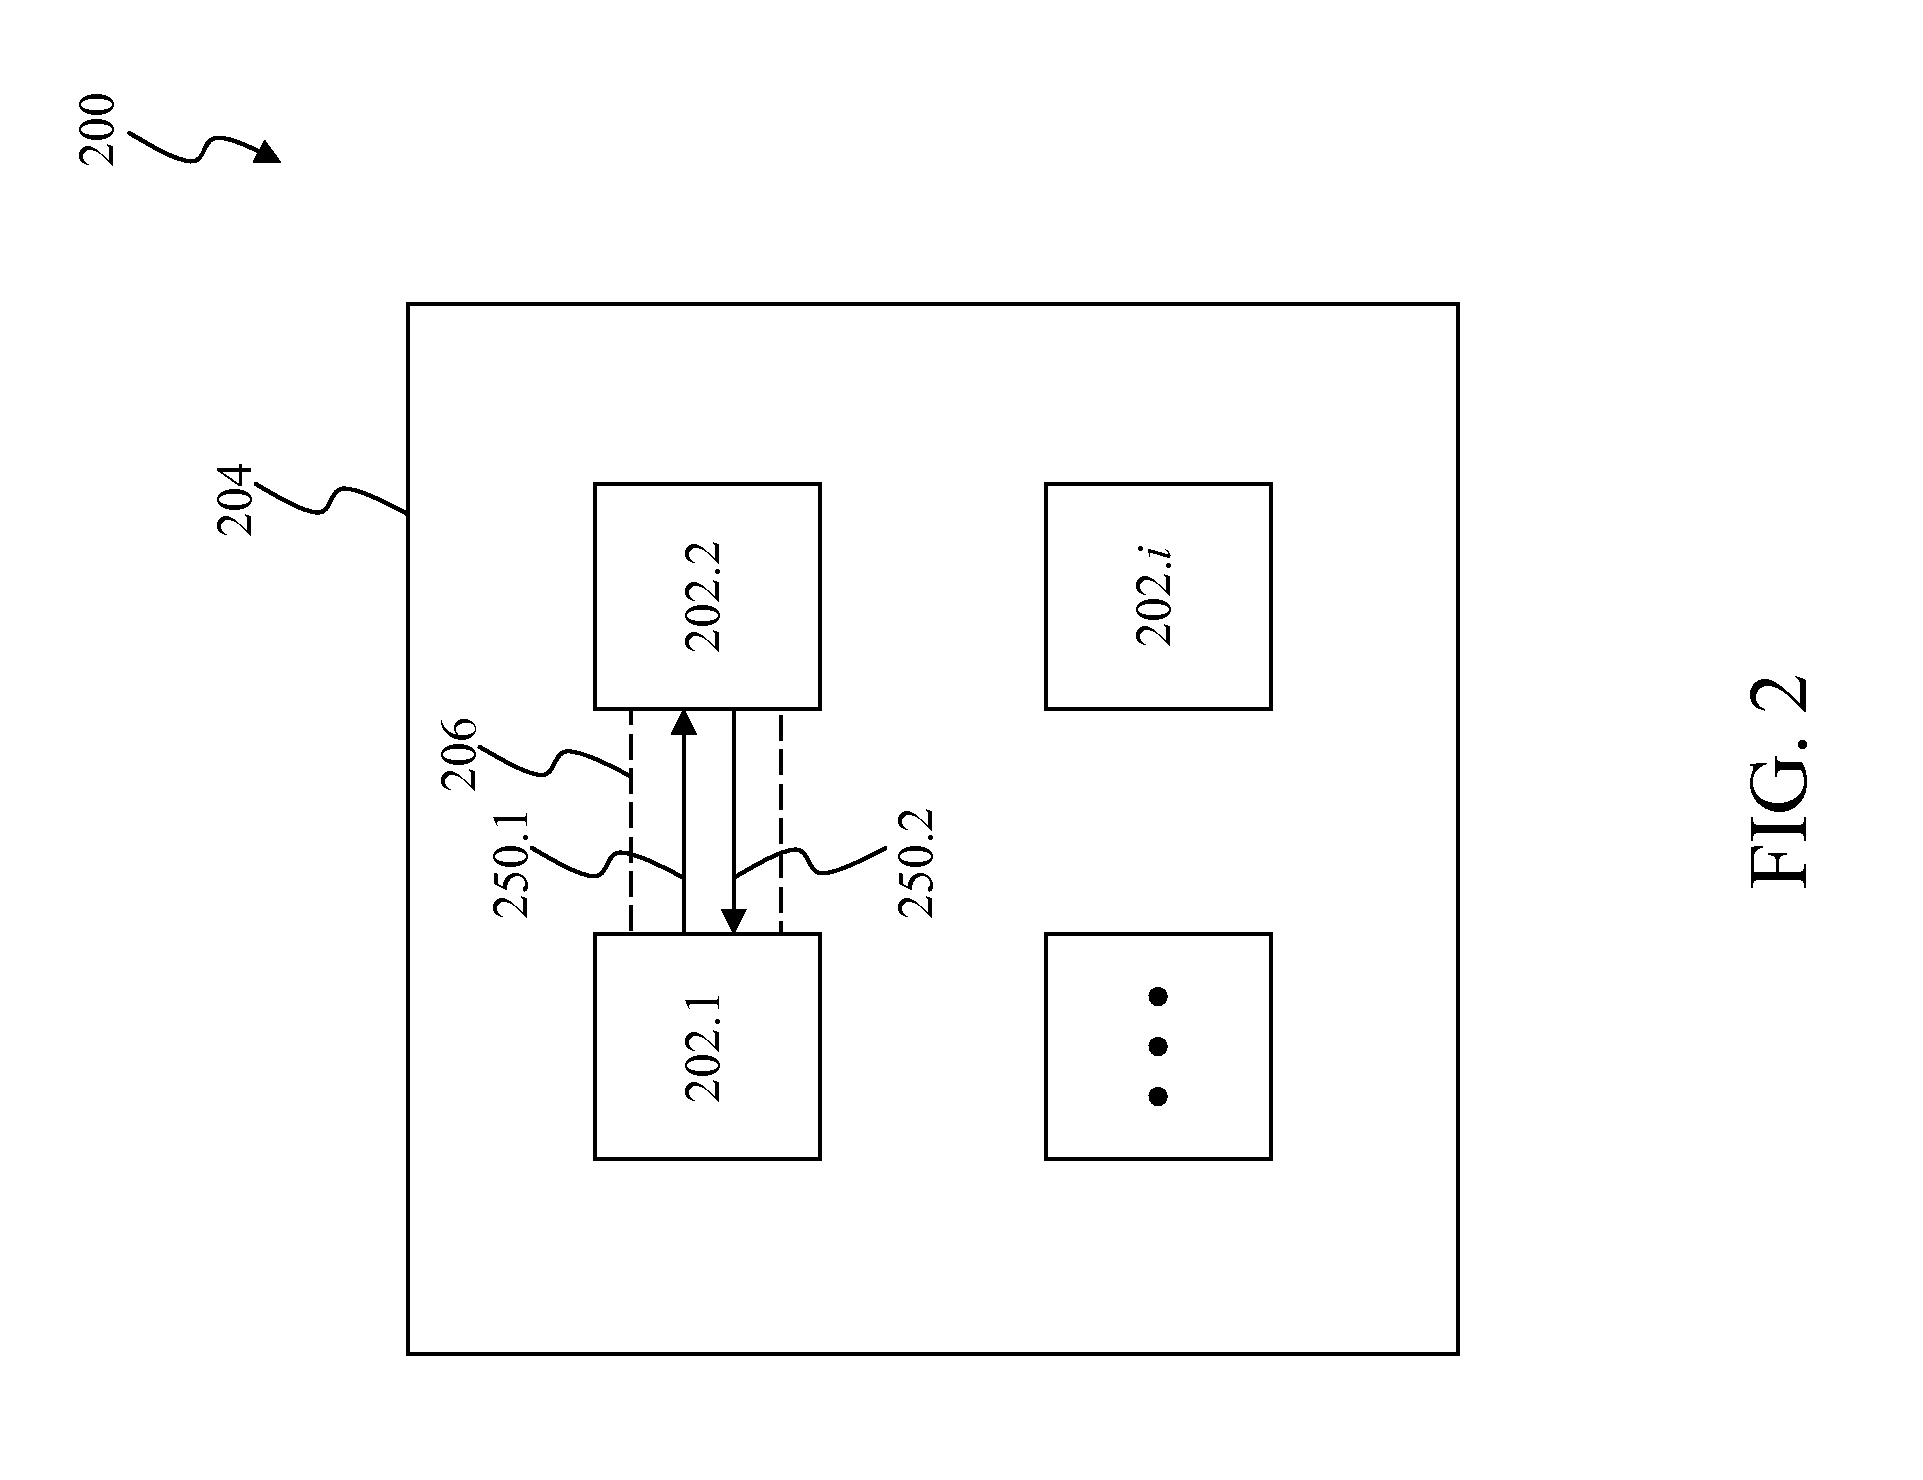 Passive Probing of Various Locations in a Wireless Enabled Integrated Circuit (IC)